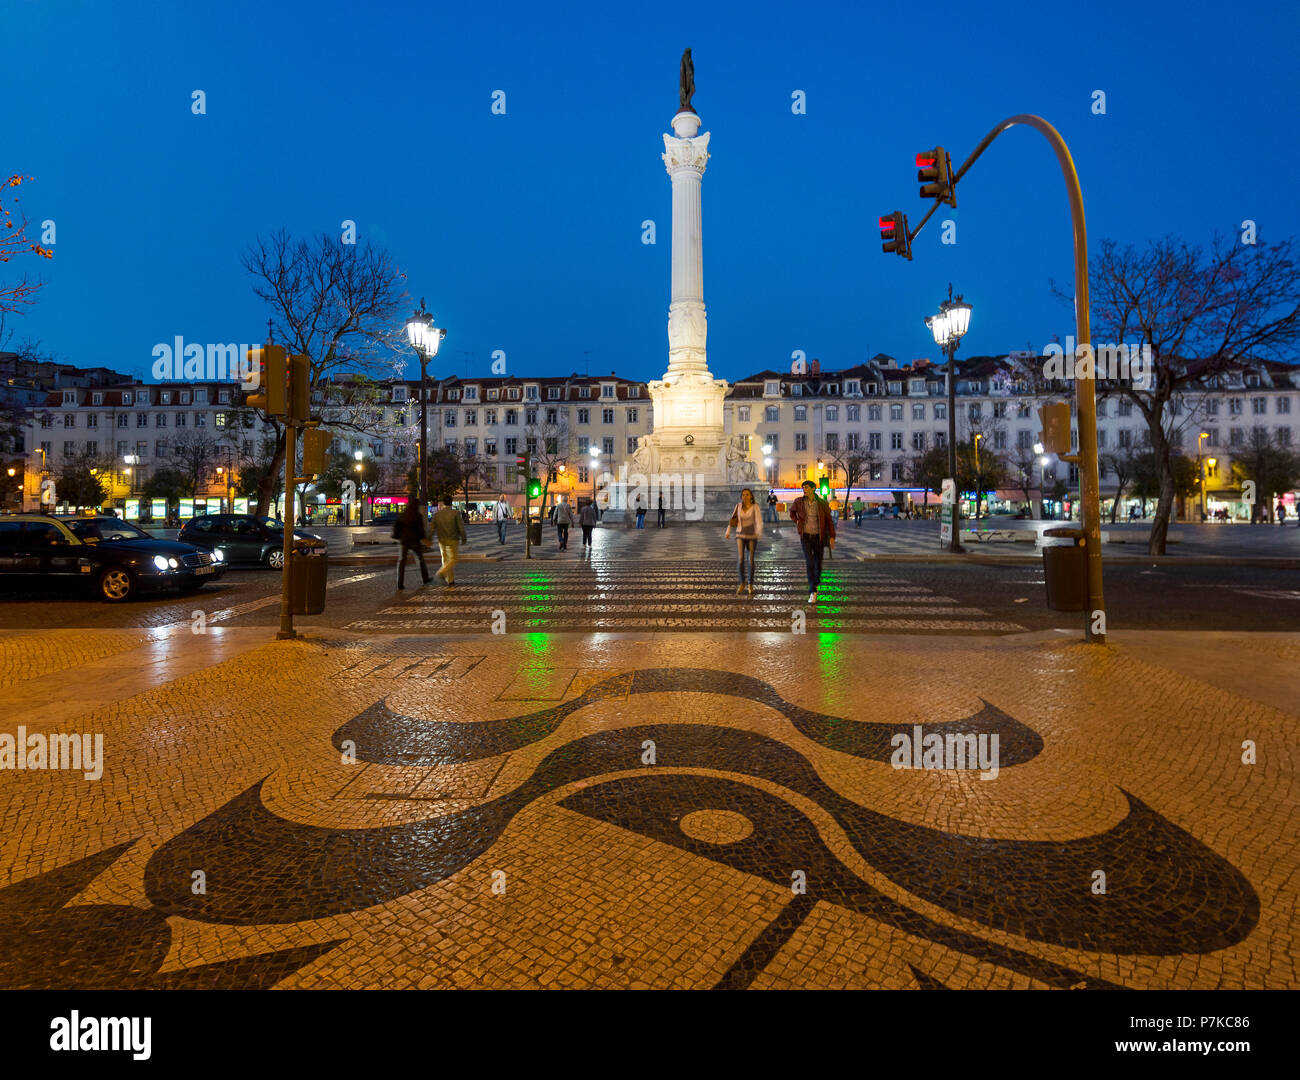 Monument, Rossio Square, paving stones arranged in a wave pattern, Lisbon, Lisbon, Portugal, Europe Stock Photo